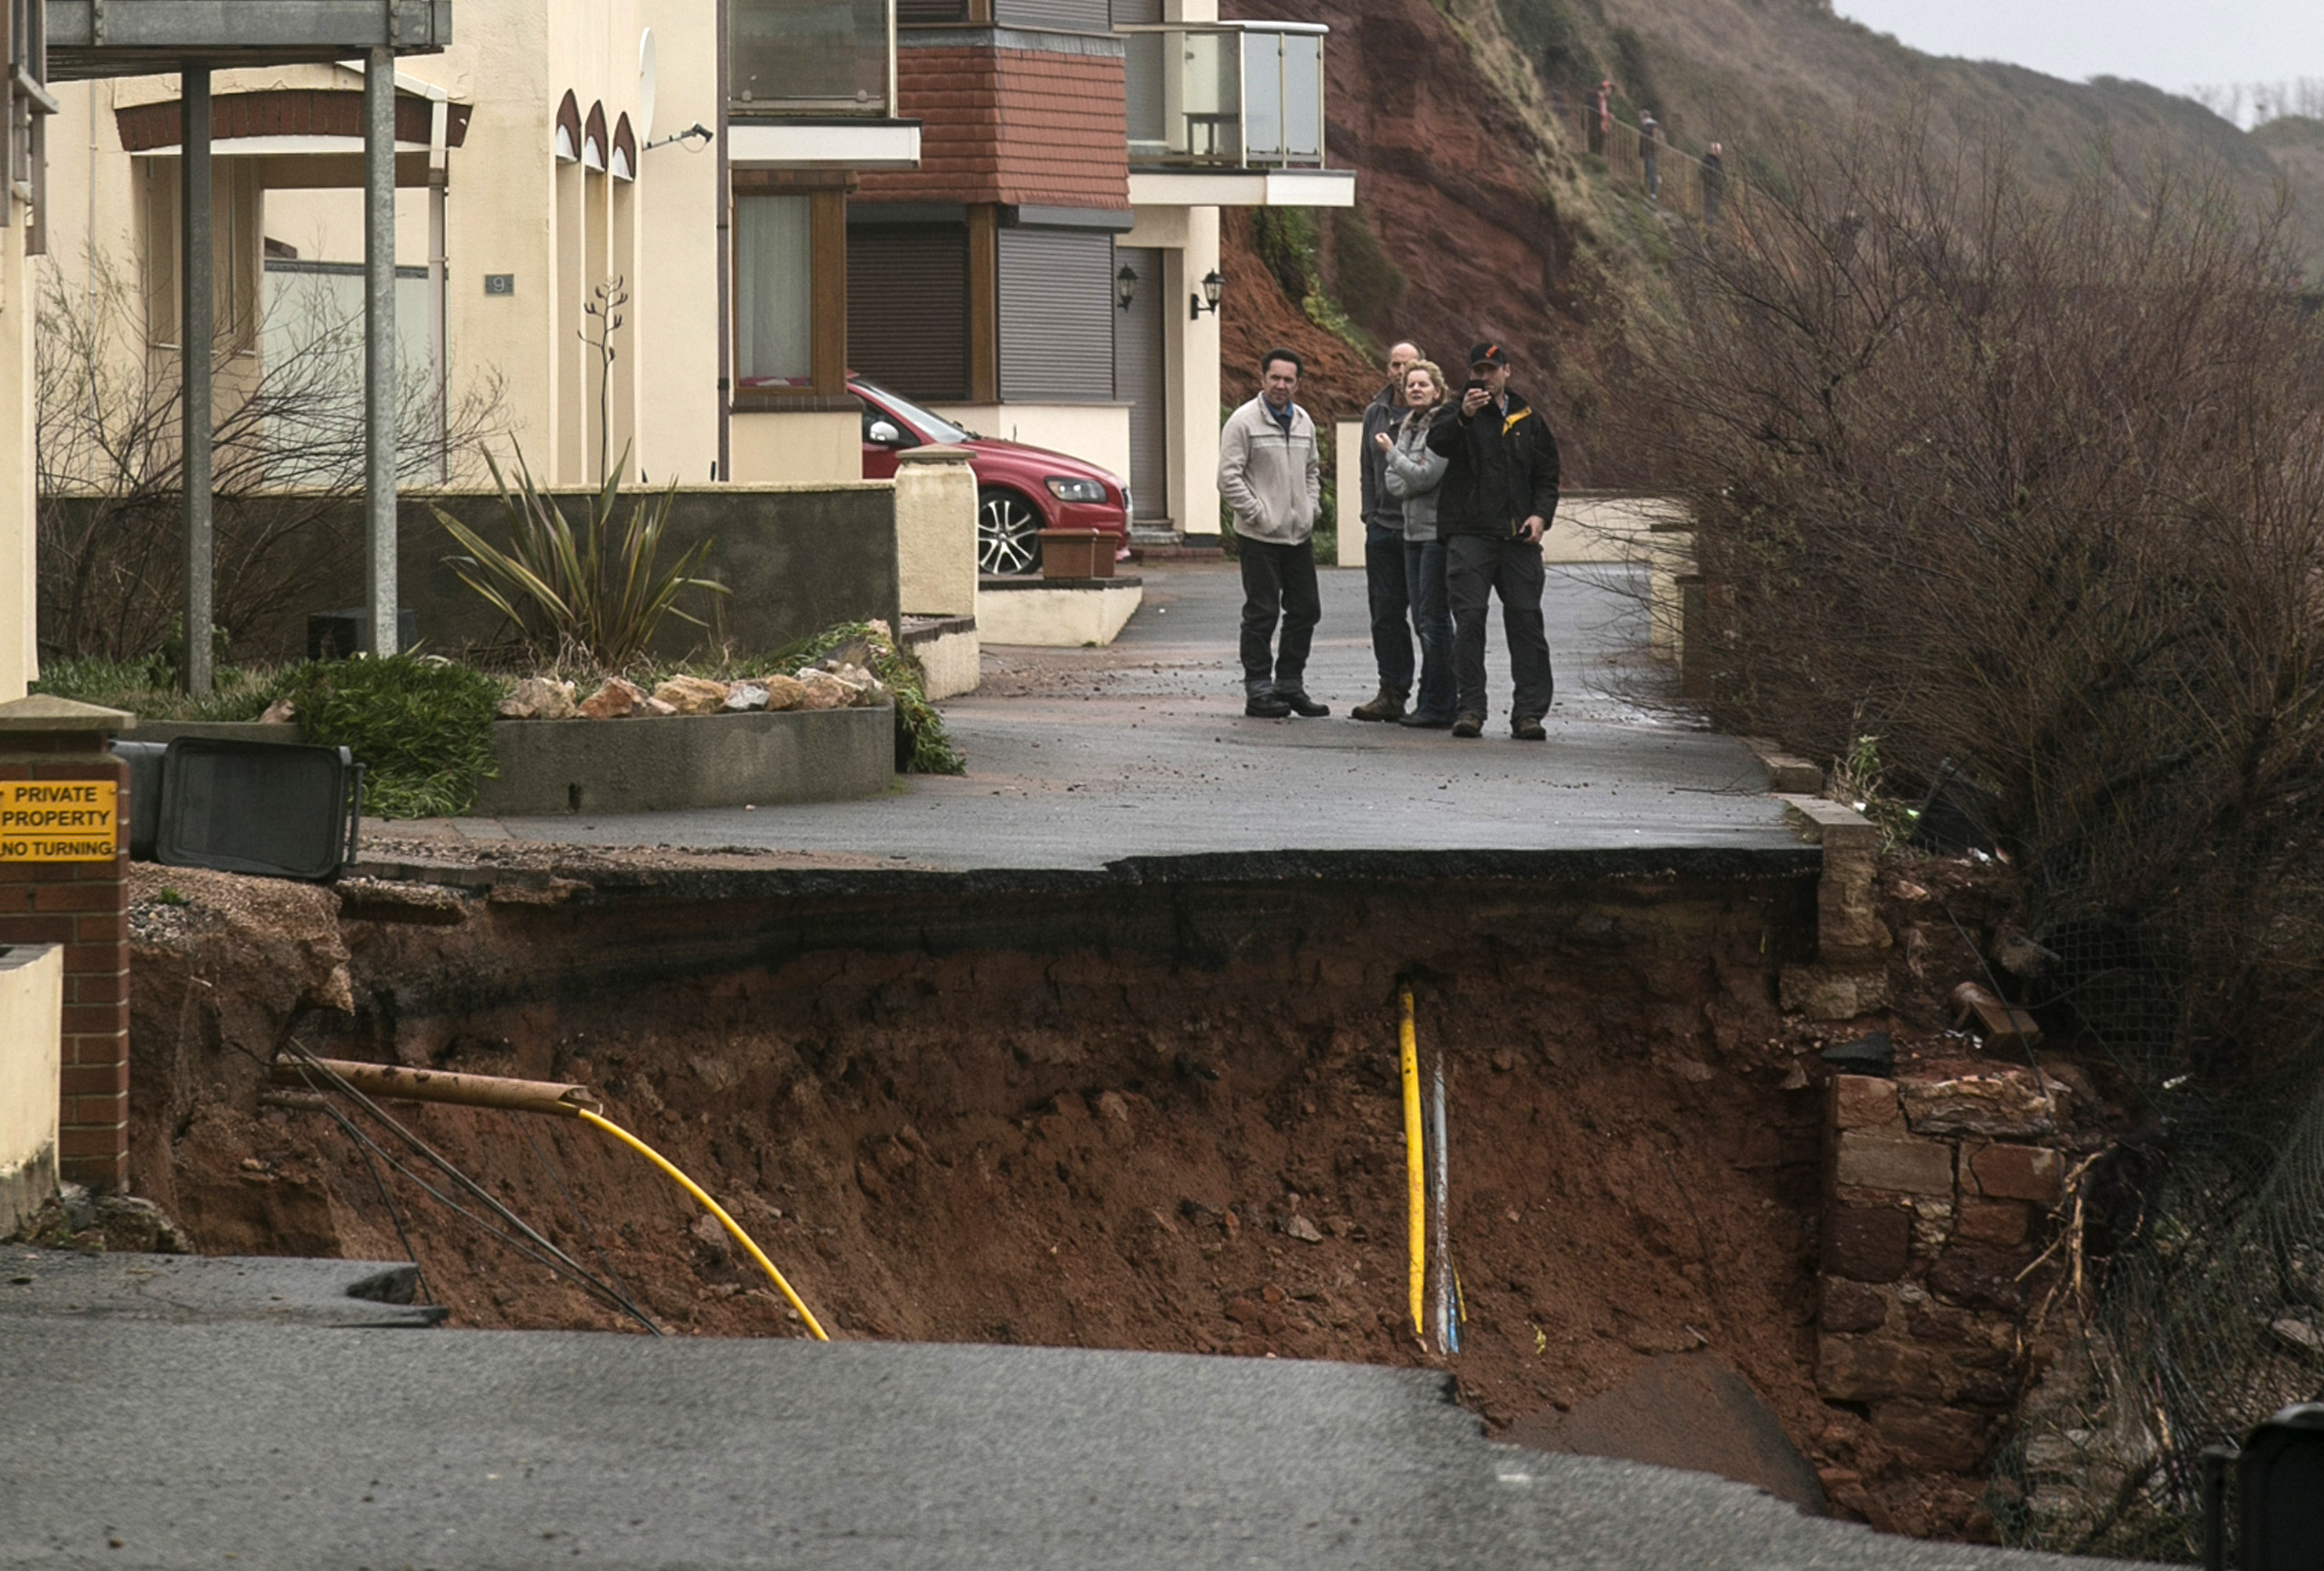 DAWLISH, UNITED KINGDOM - FEBRUARY 05:Residents look at a road that has been partly washed away by the sea at Dawlish on February 5, 2014 in Devon, England. With high tides combined with gale